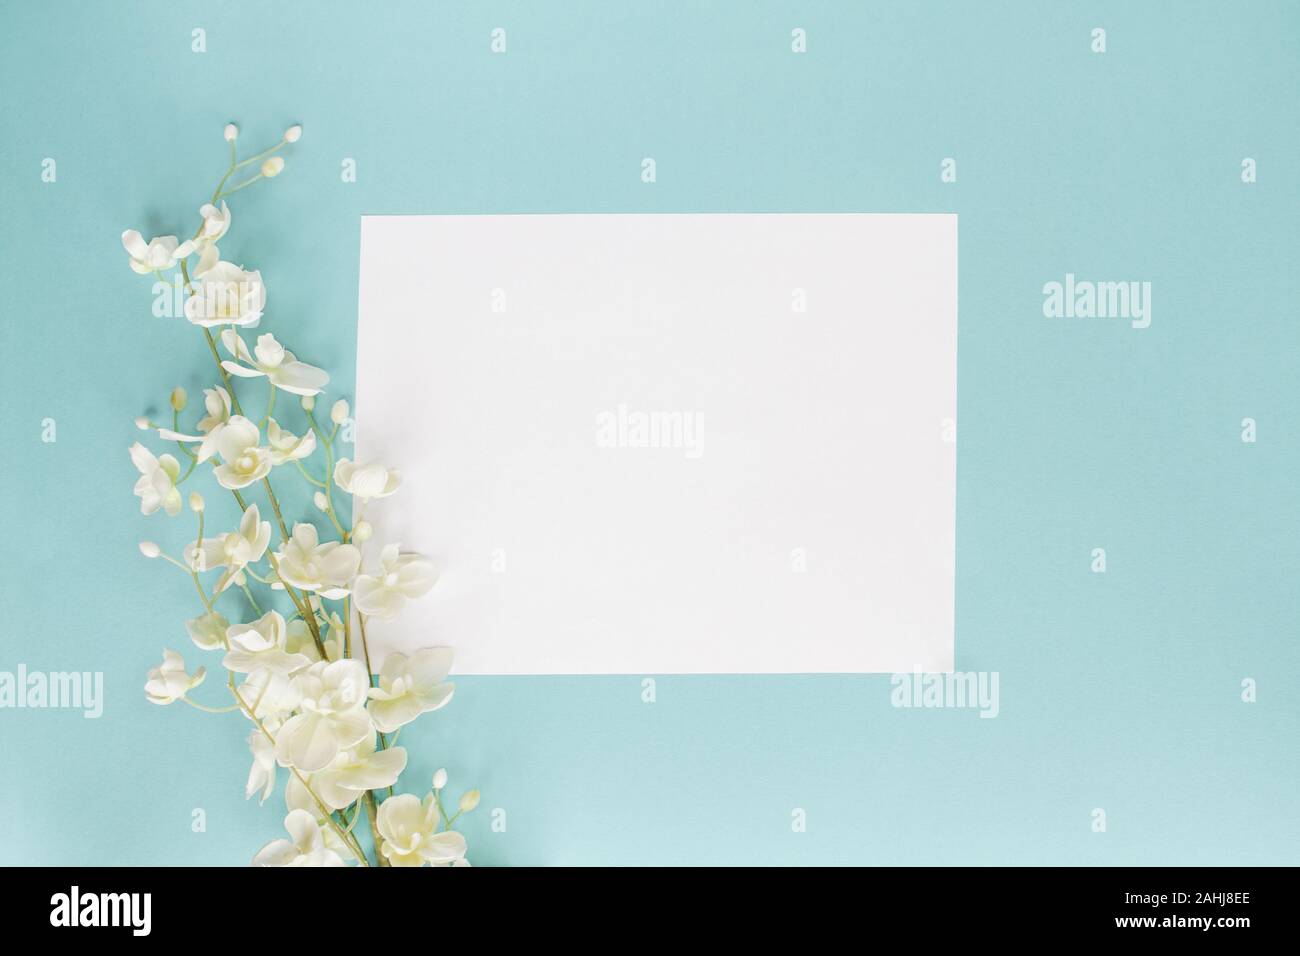 Mothers day or wedding floral card with paper note and white flowers over a blue background shot from above. Flat lay. Stock Photo